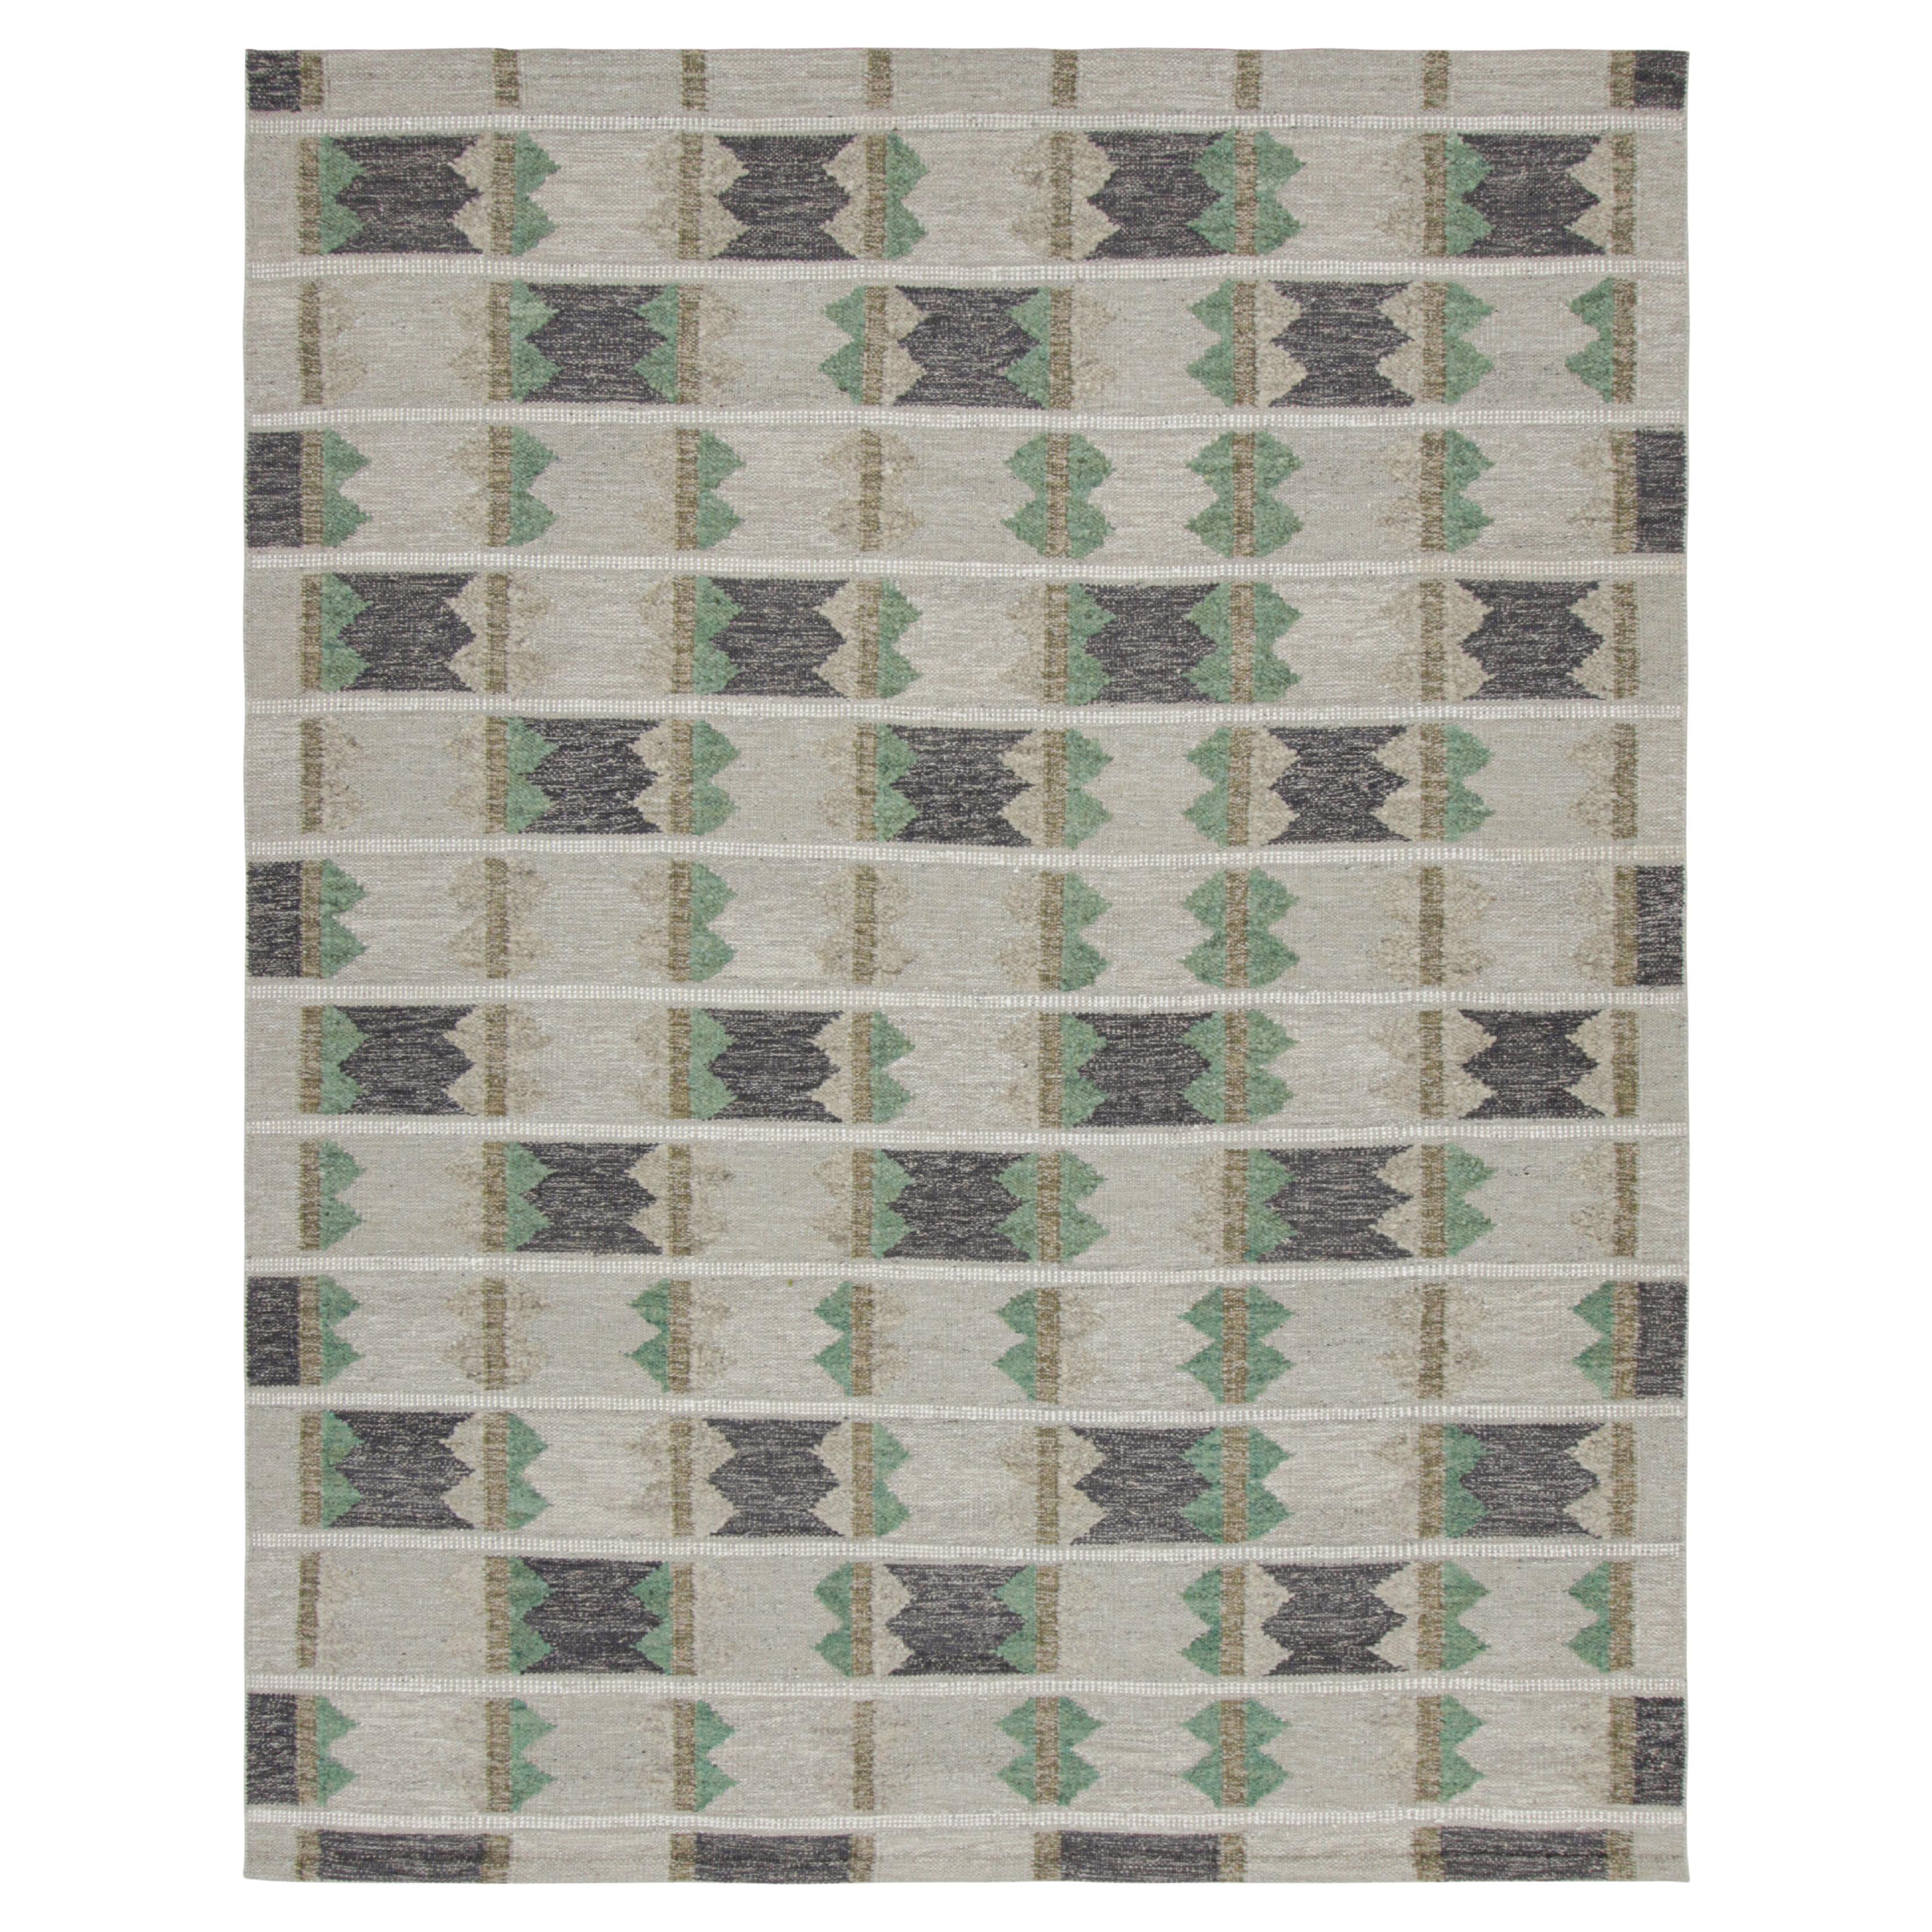 Rug & Kilim’s Scandinavian Style Rug with Geometric Patterns in Tones of Green For Sale